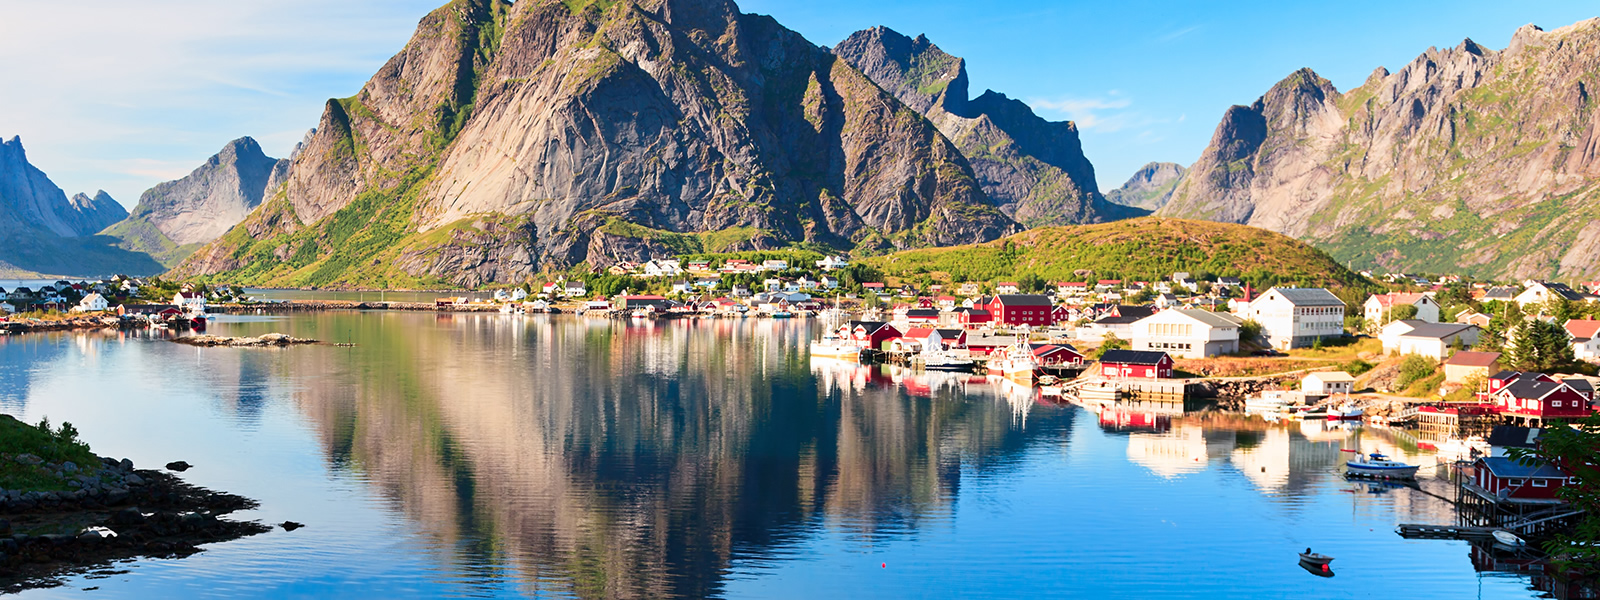 Scandinavia Tour Packages | Scandinavia Summer Tour Packages From India